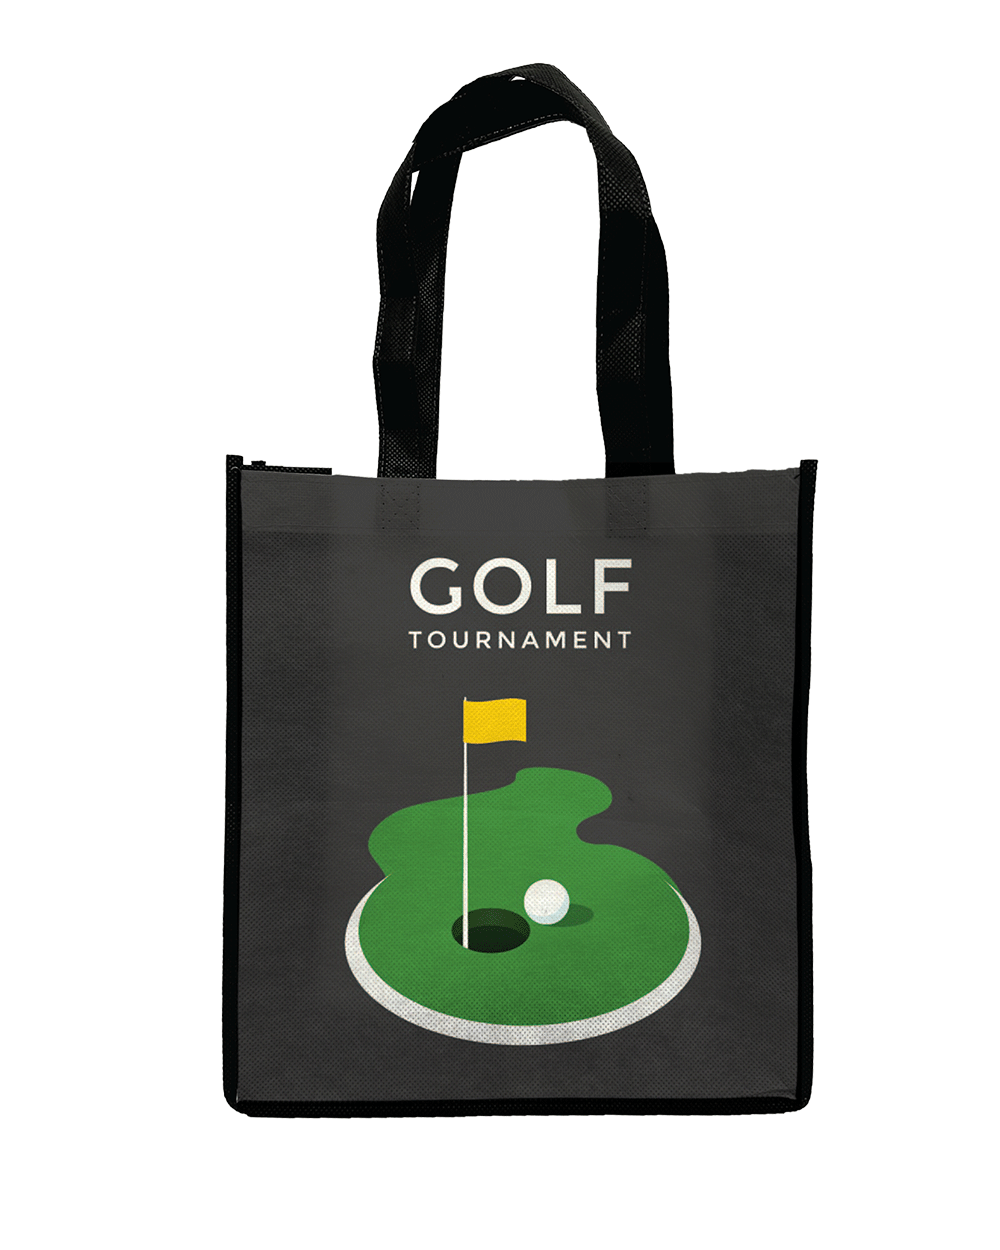 Copy of Personalized Bulk Pack -Golf- Reusable, Great for Grocery, Shopping, Carry on Bag-1Pack(10pcs)